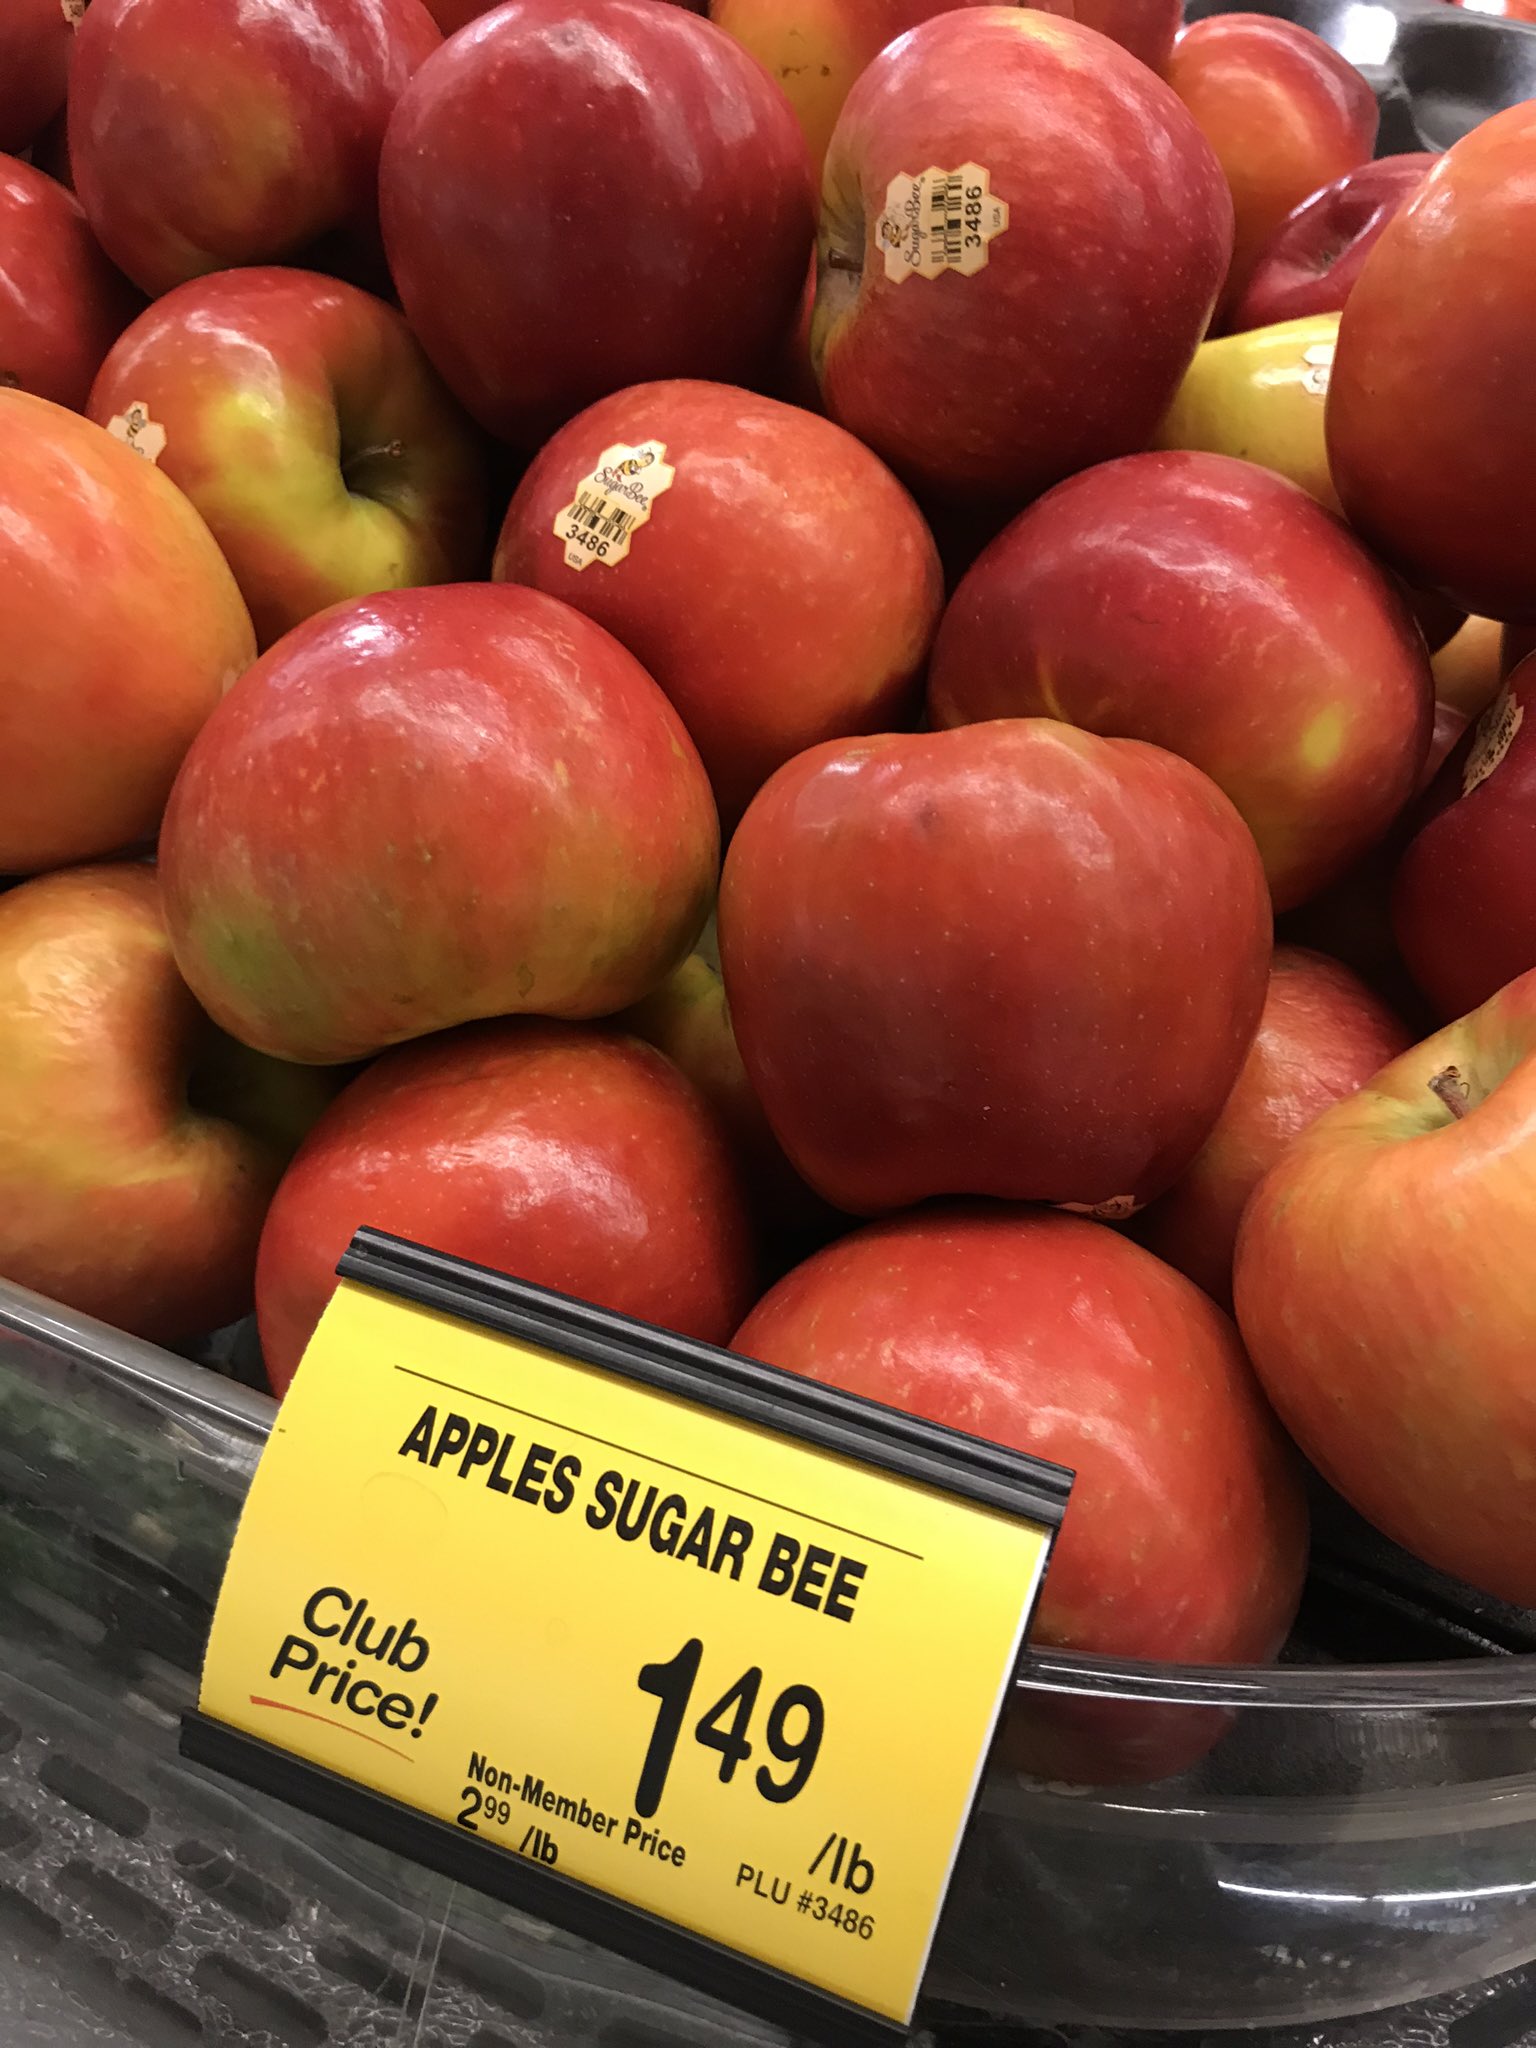 Eric Patrick on X: The Sugar Bee is one of my fav new apples & hard to  beat at $1.49 @Safeway - my 20+ yr old daughter- not a huge apple lover